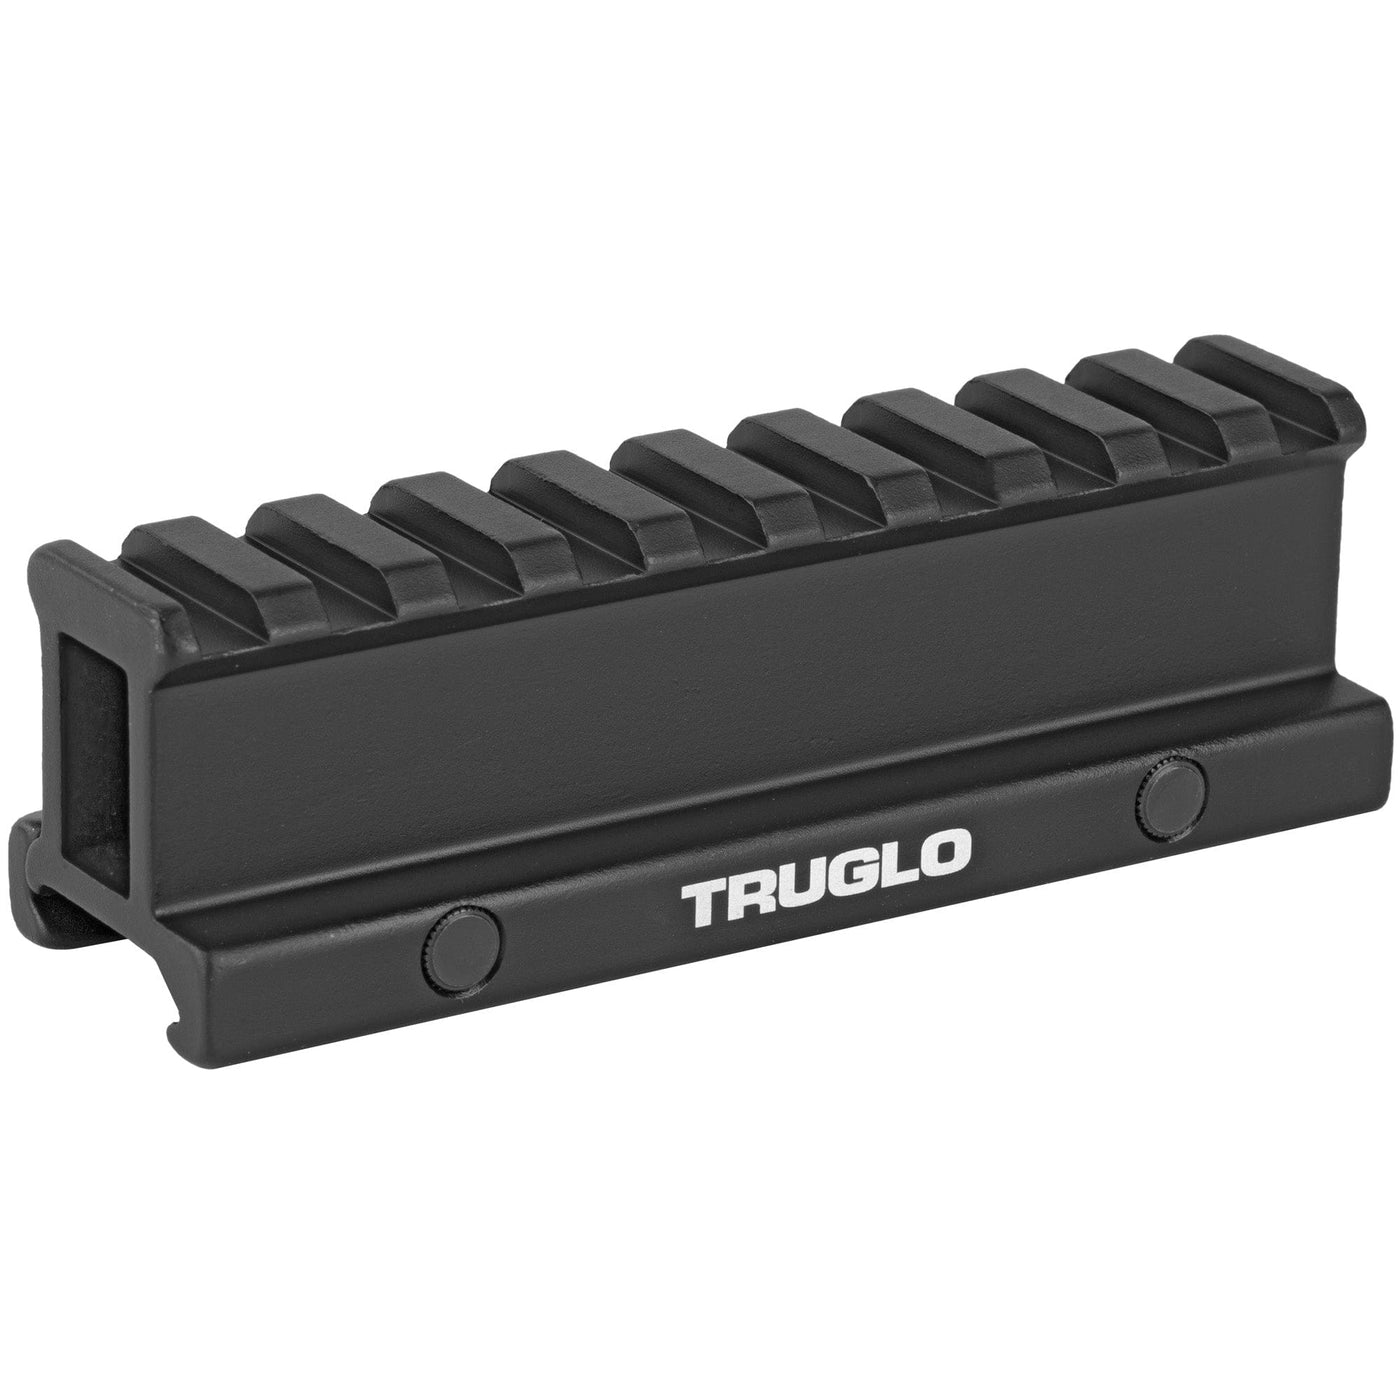 Truglo Truglo 1-piece Picatinny Riser - Mount 3/4" Rise 4" Length 3/4" Scope Mounts And Rings